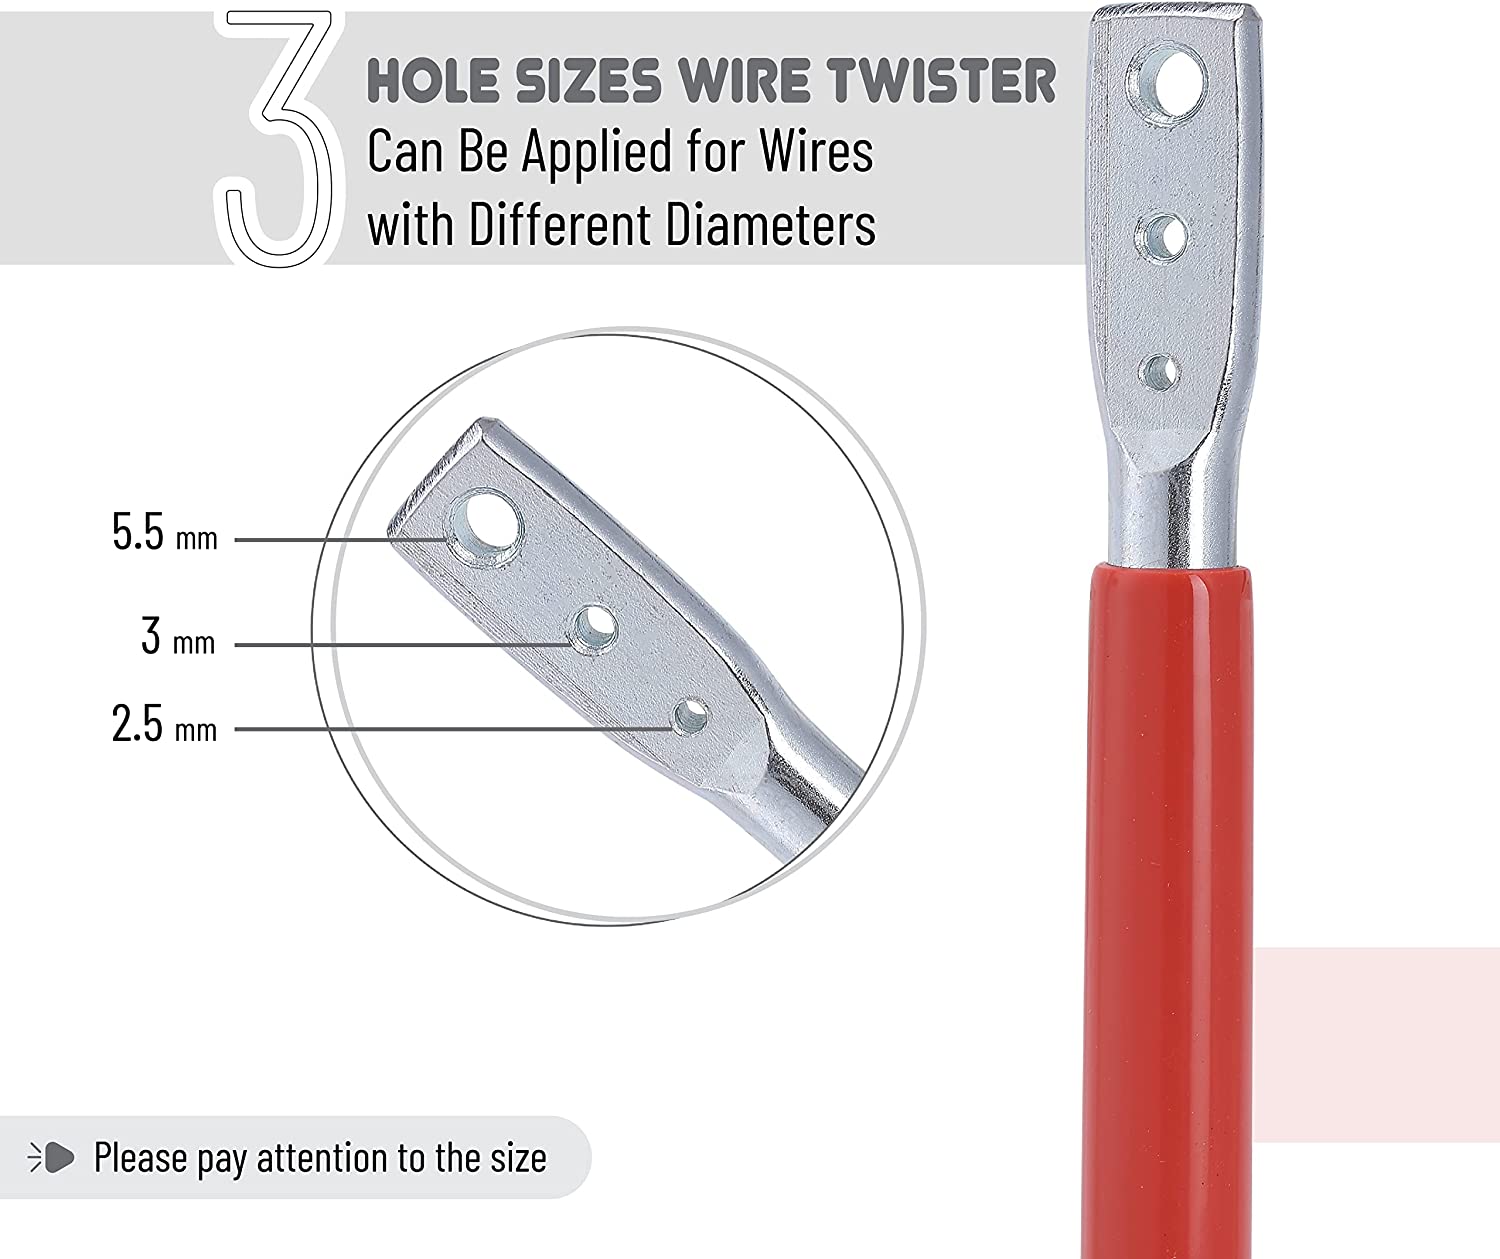 Patriot - 3 Hole Wire Twister Tool